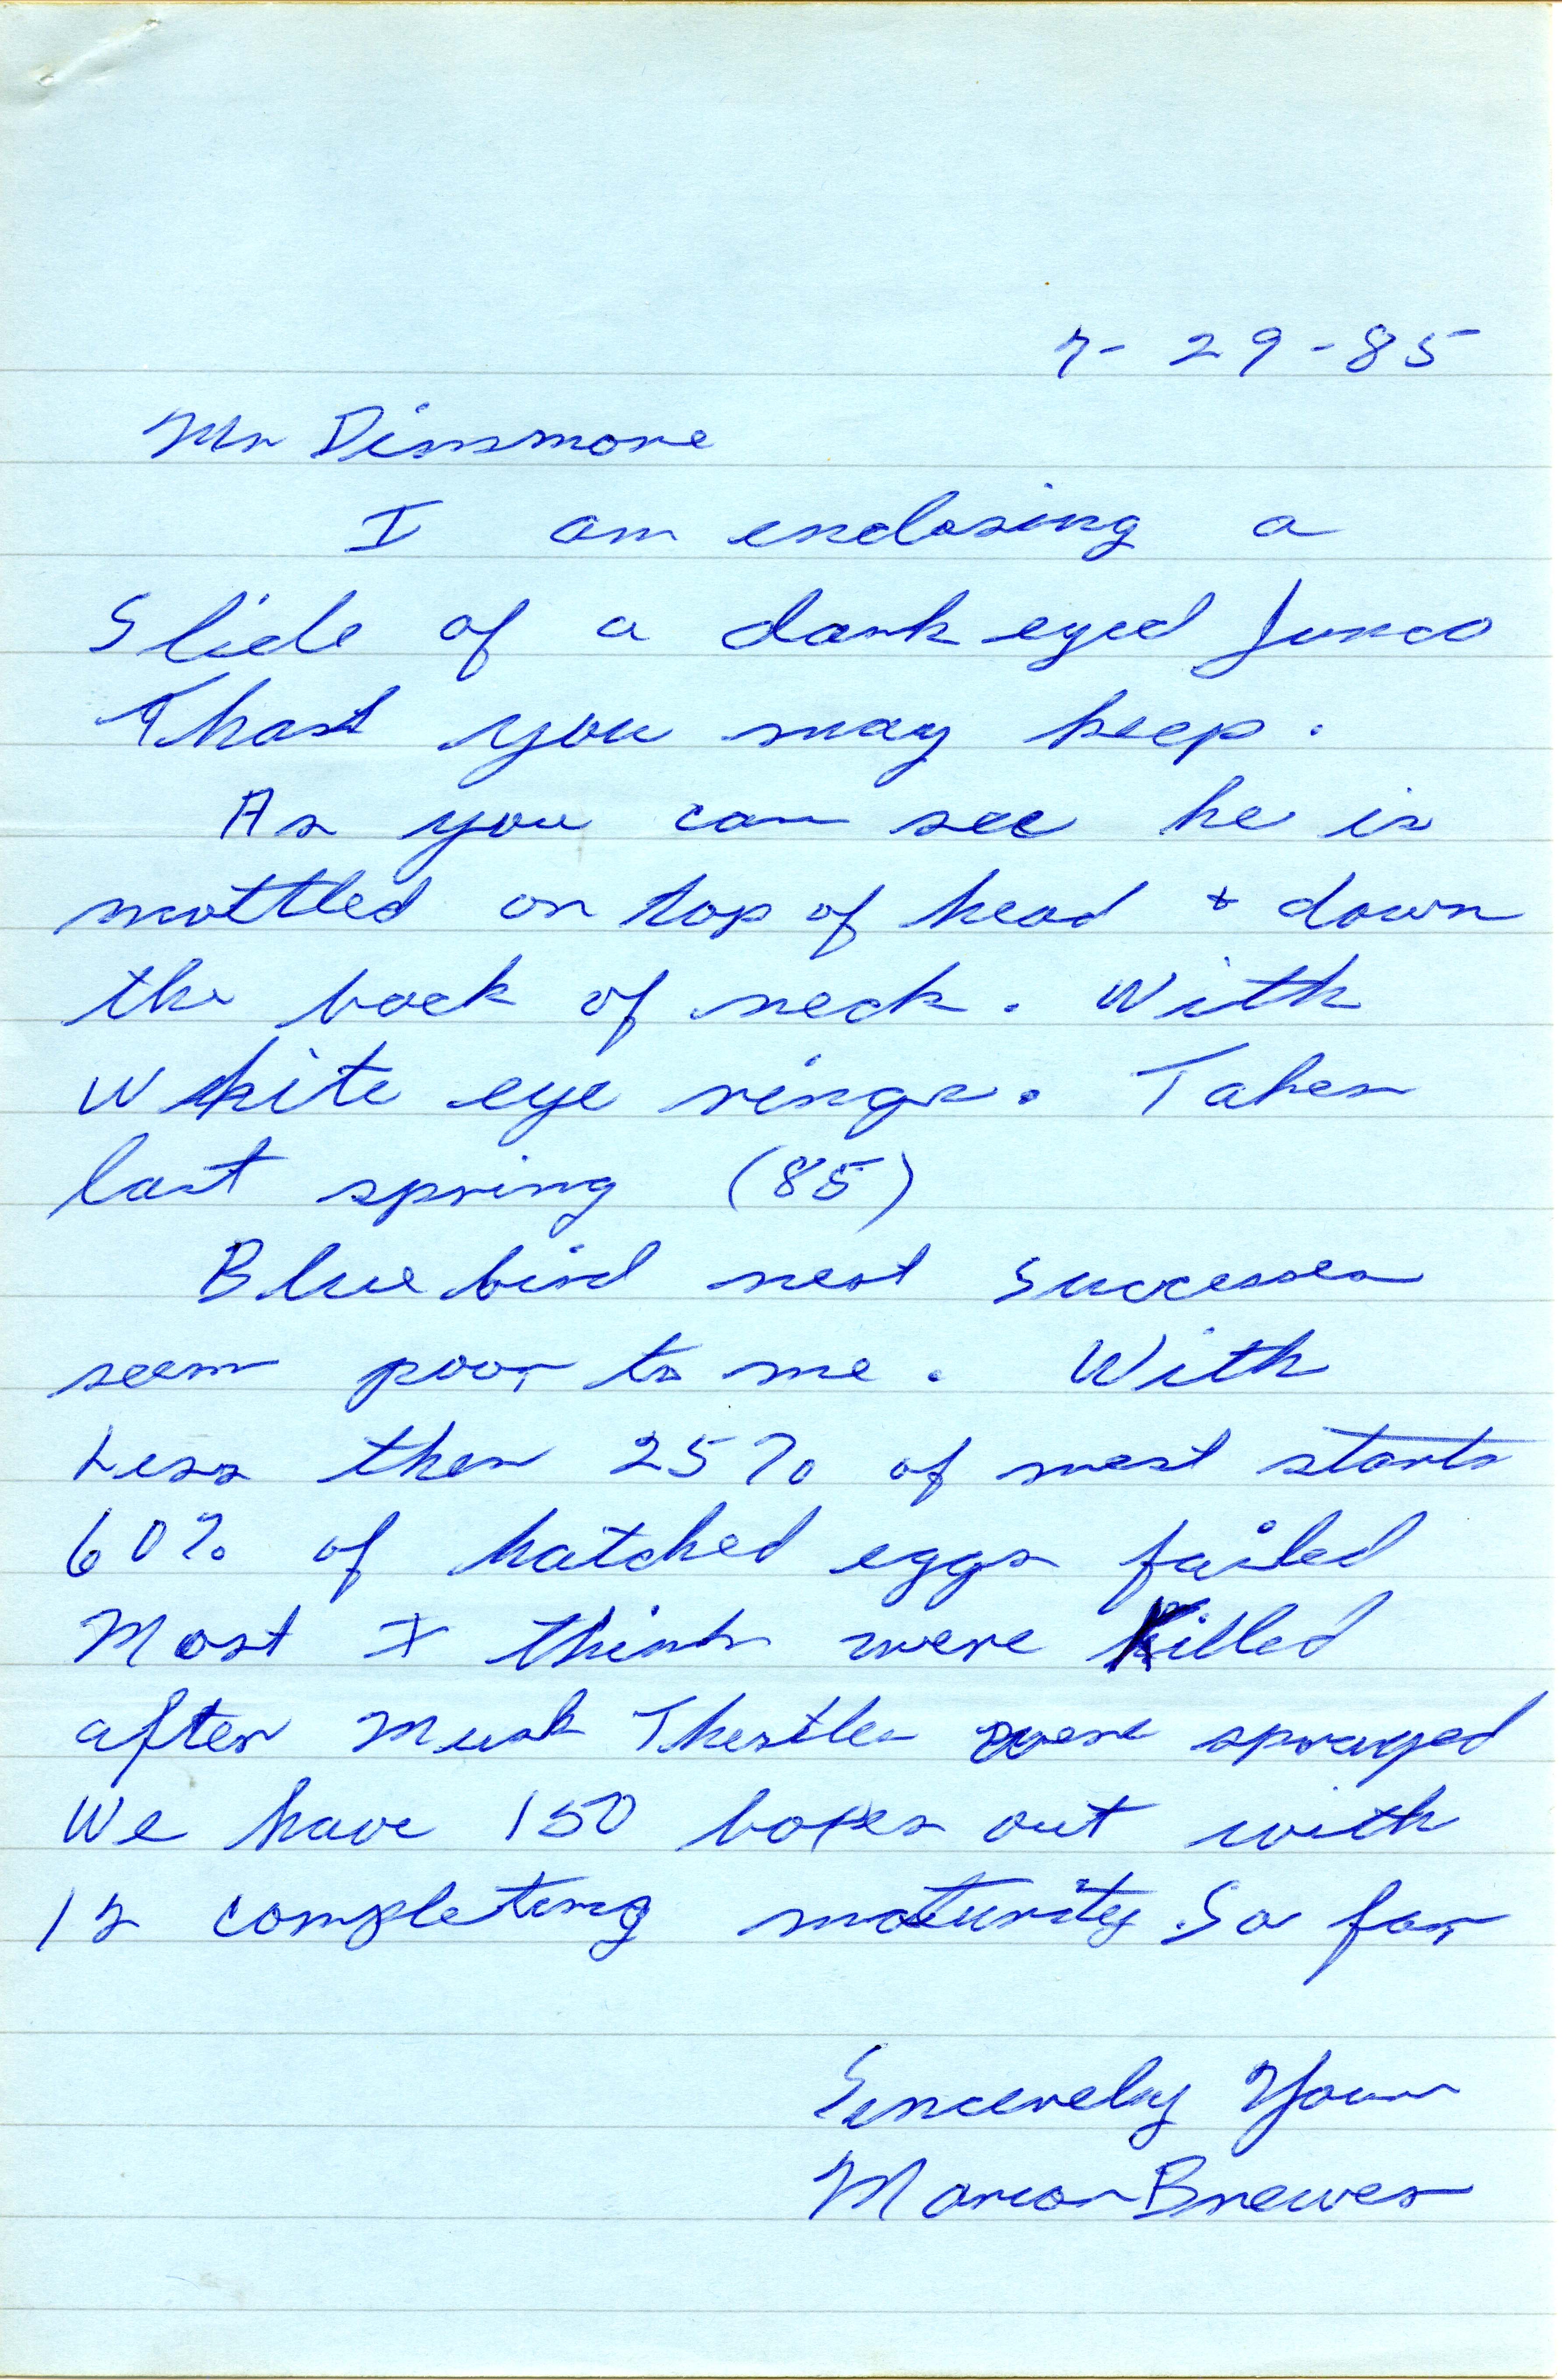 Marian M. Brewer letter to Mr. Dinsmore regarding field notes, July 29, 1985